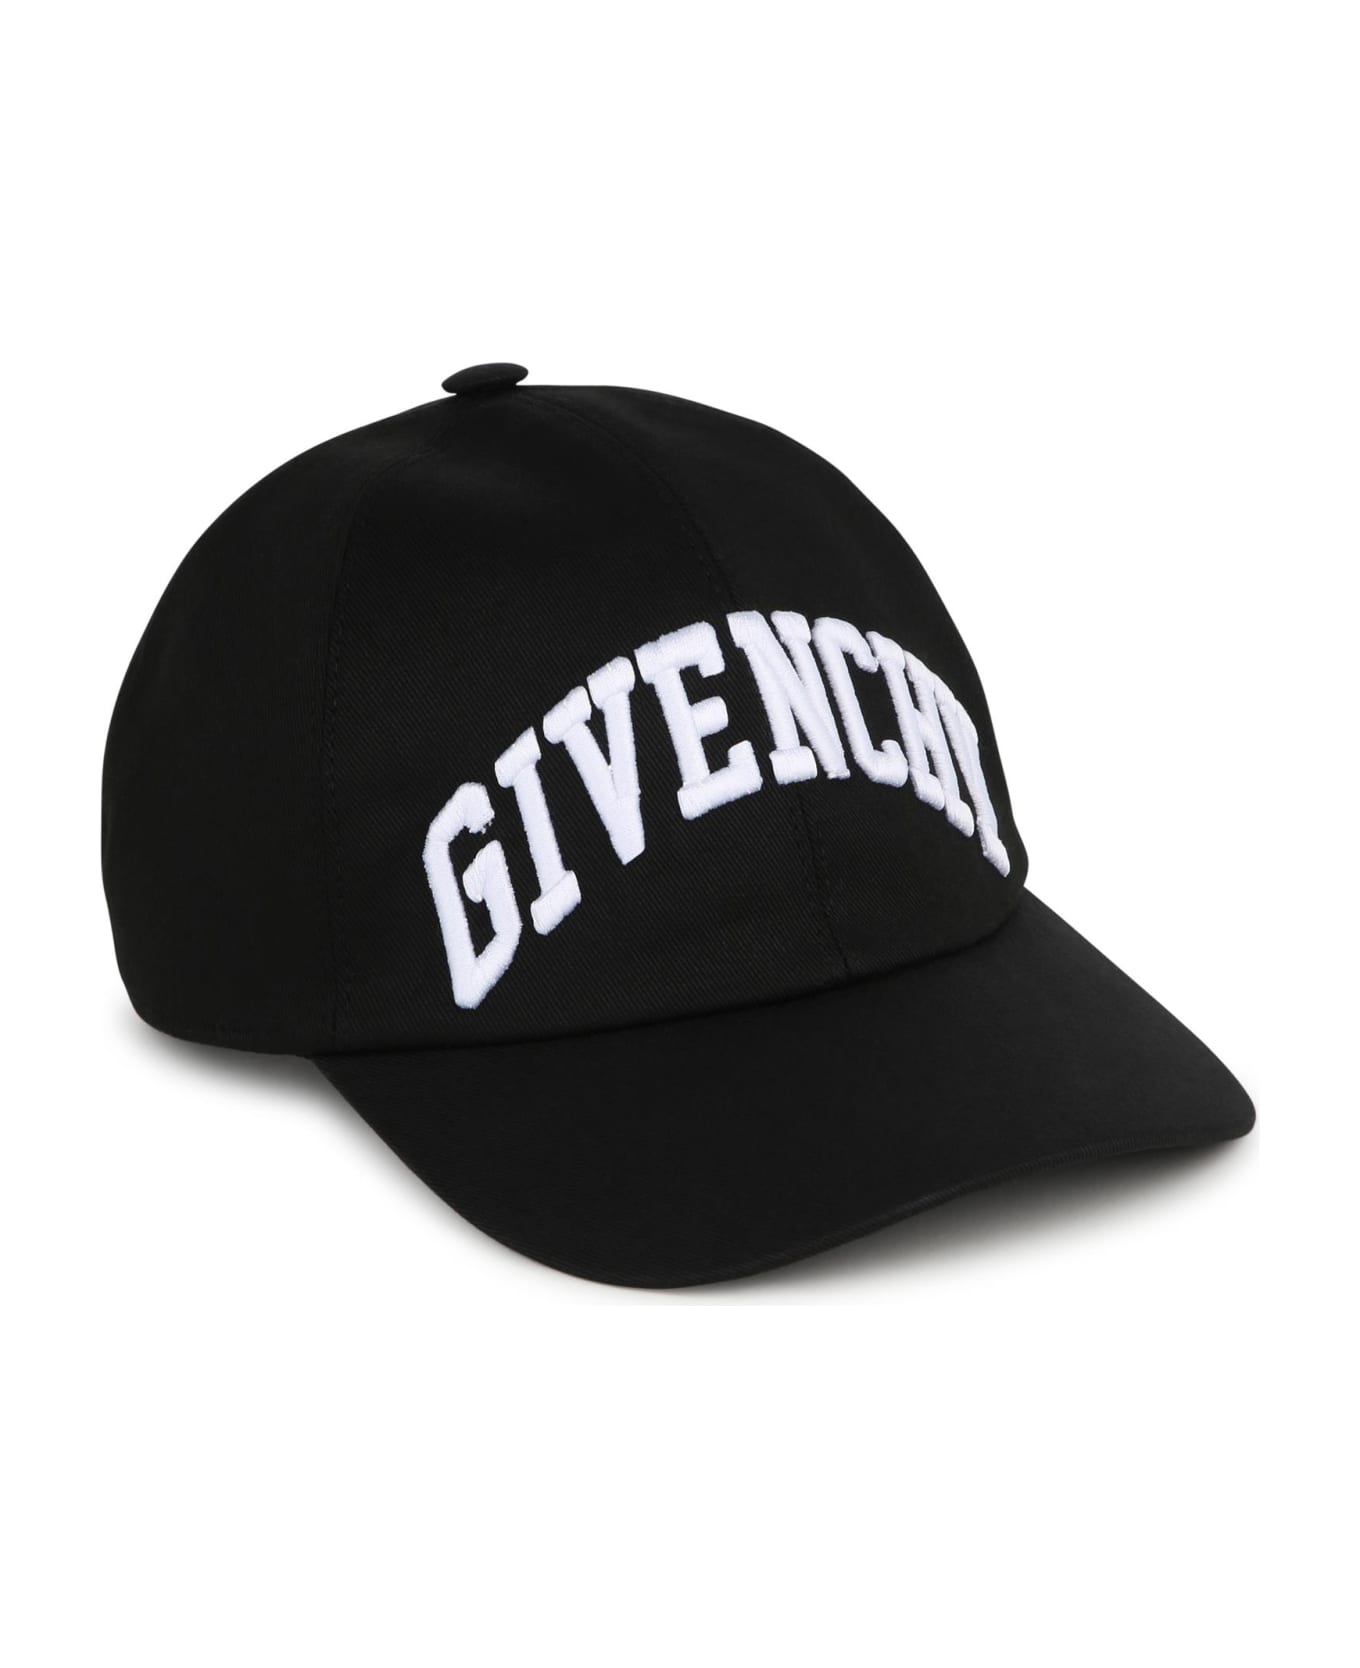 Givenchy Baseball Berretto hat With Embroidery - Black